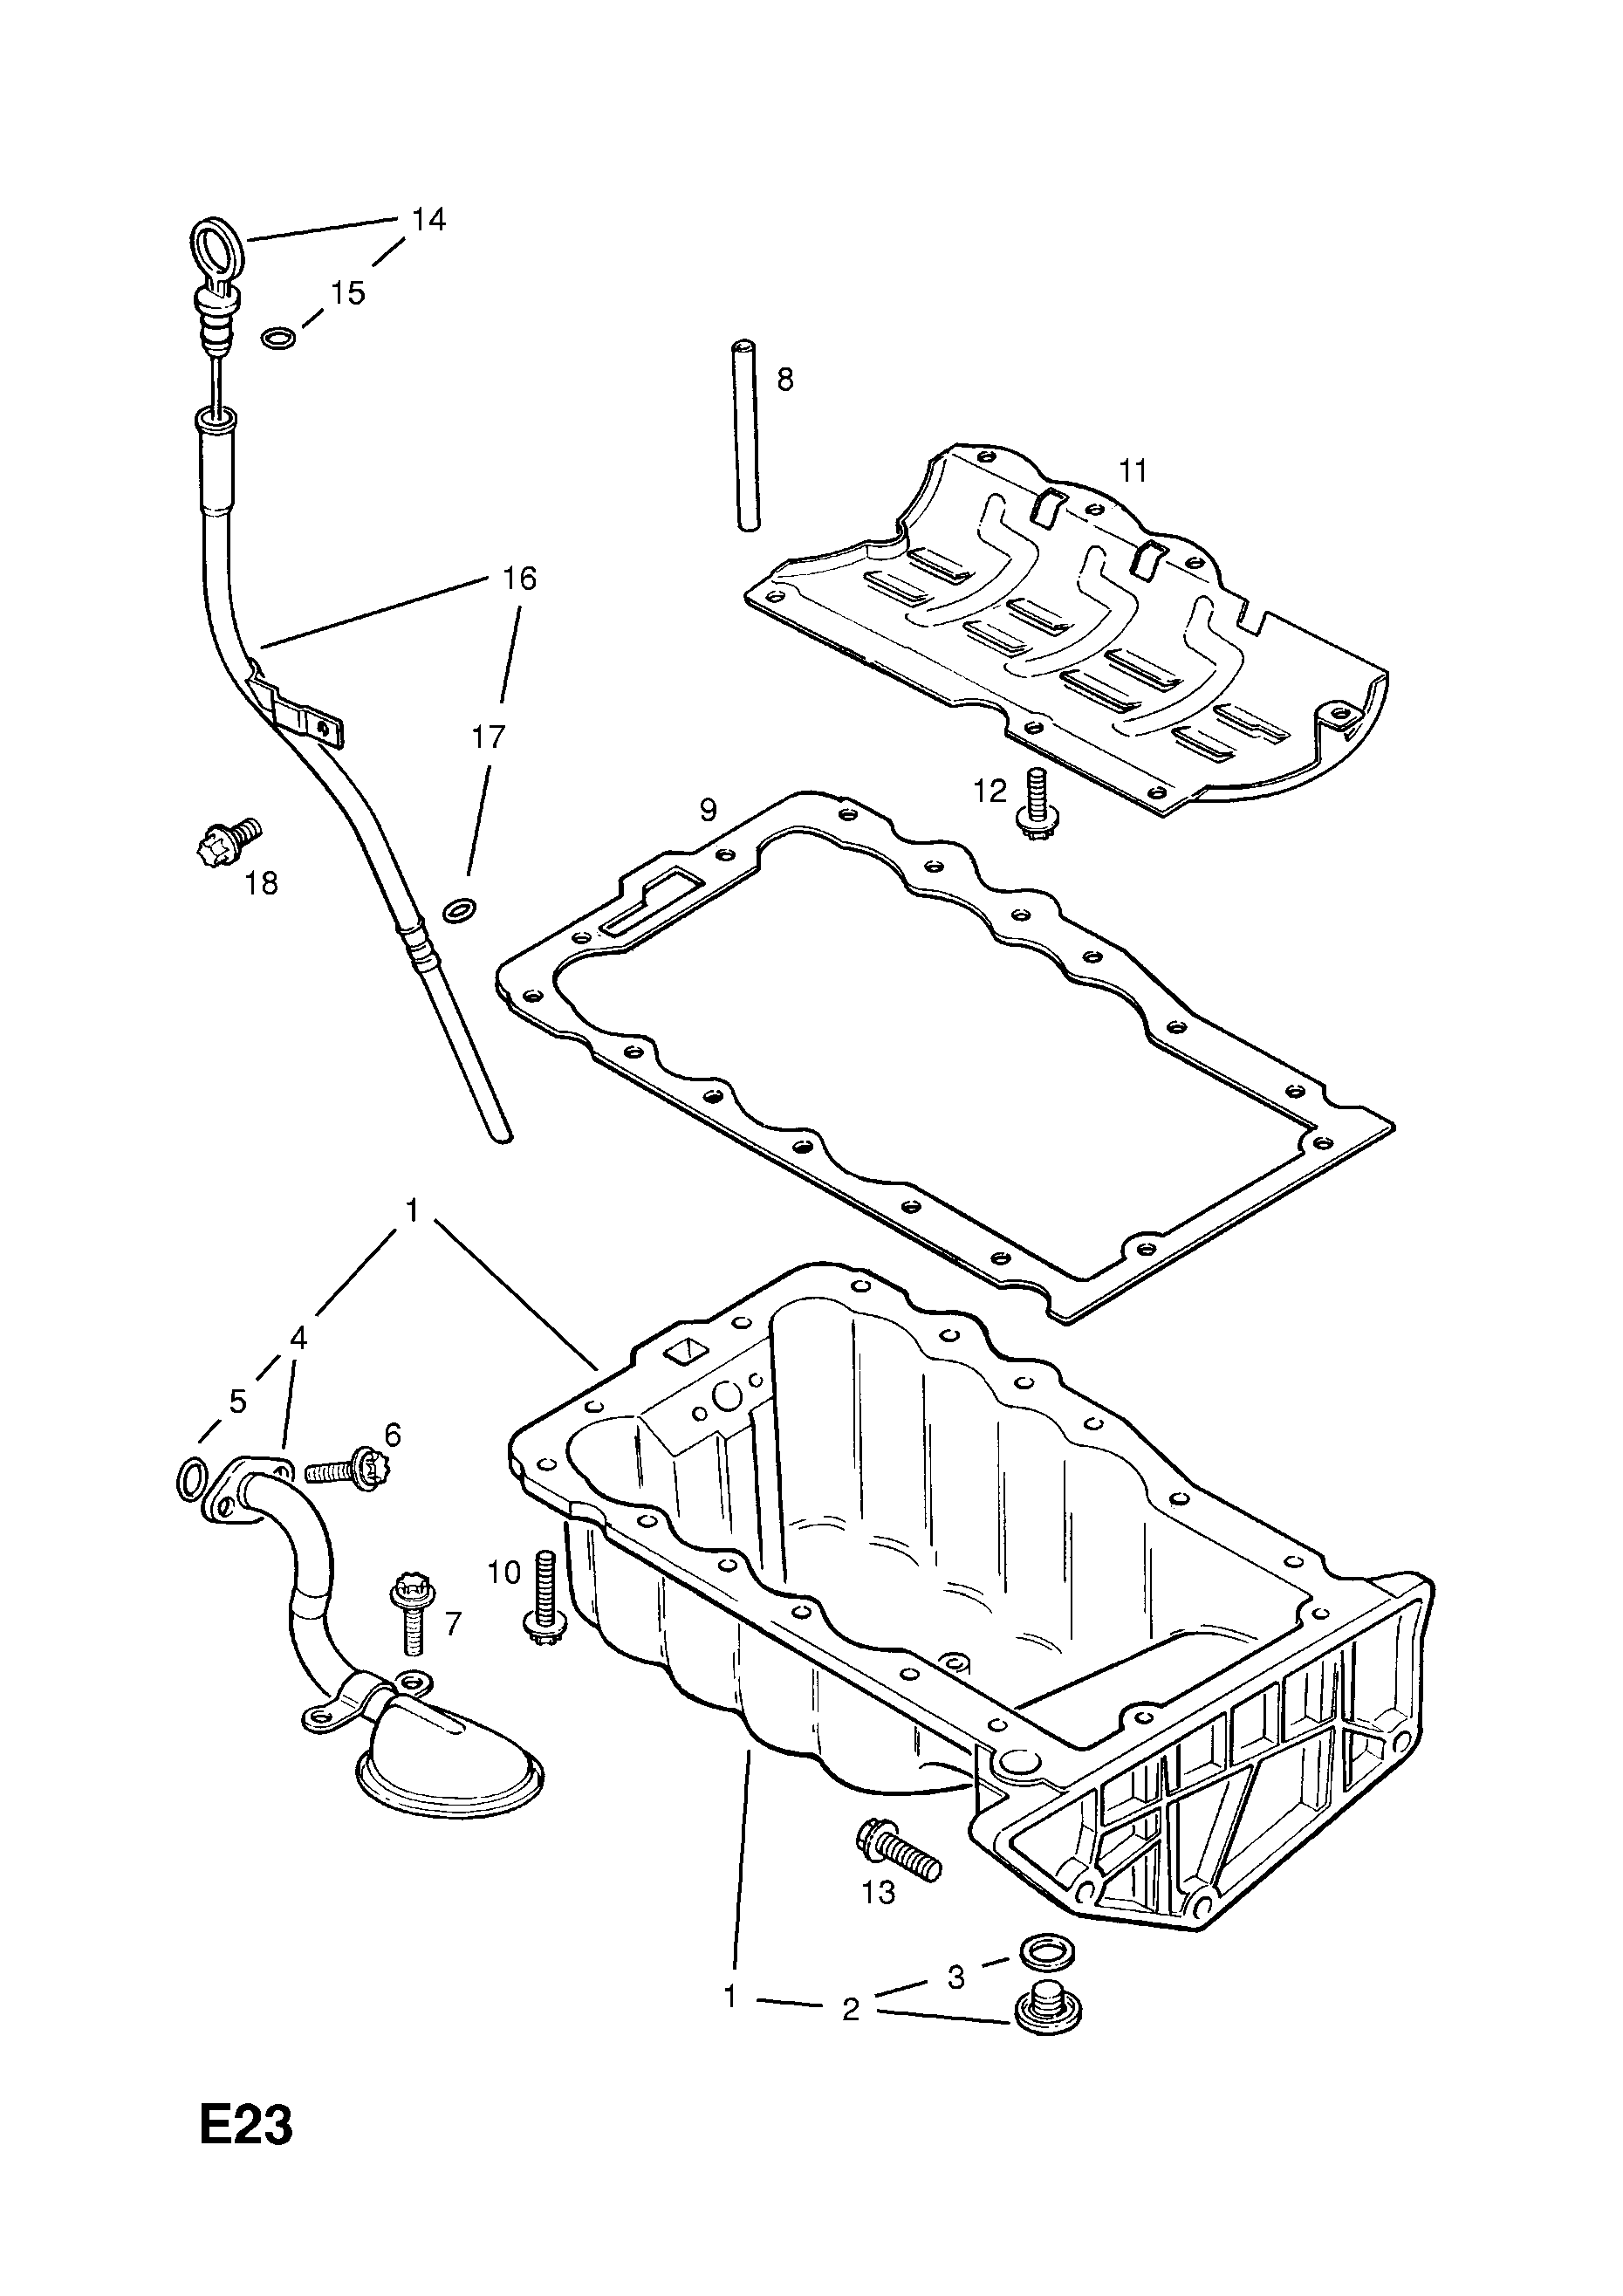 OIL PAN AND FITTINGS